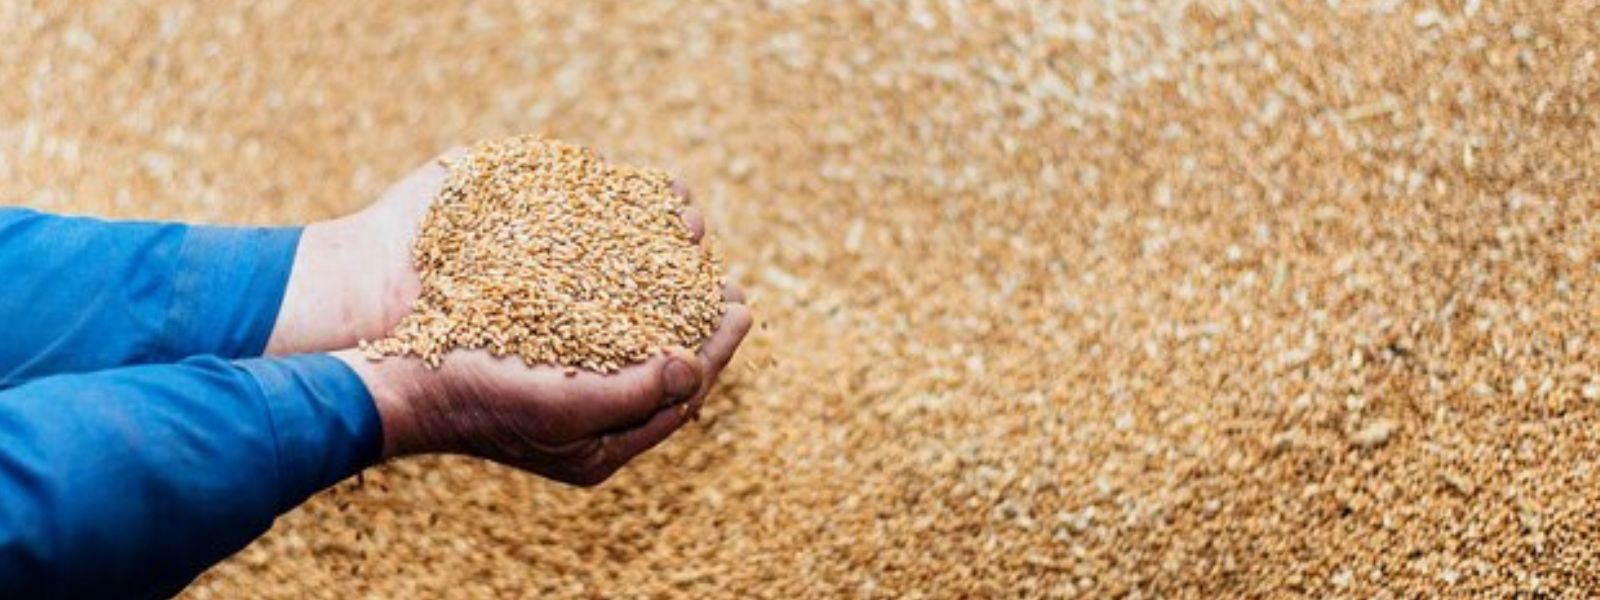 Value of missing paddy estimated at over Rs.65 Mn